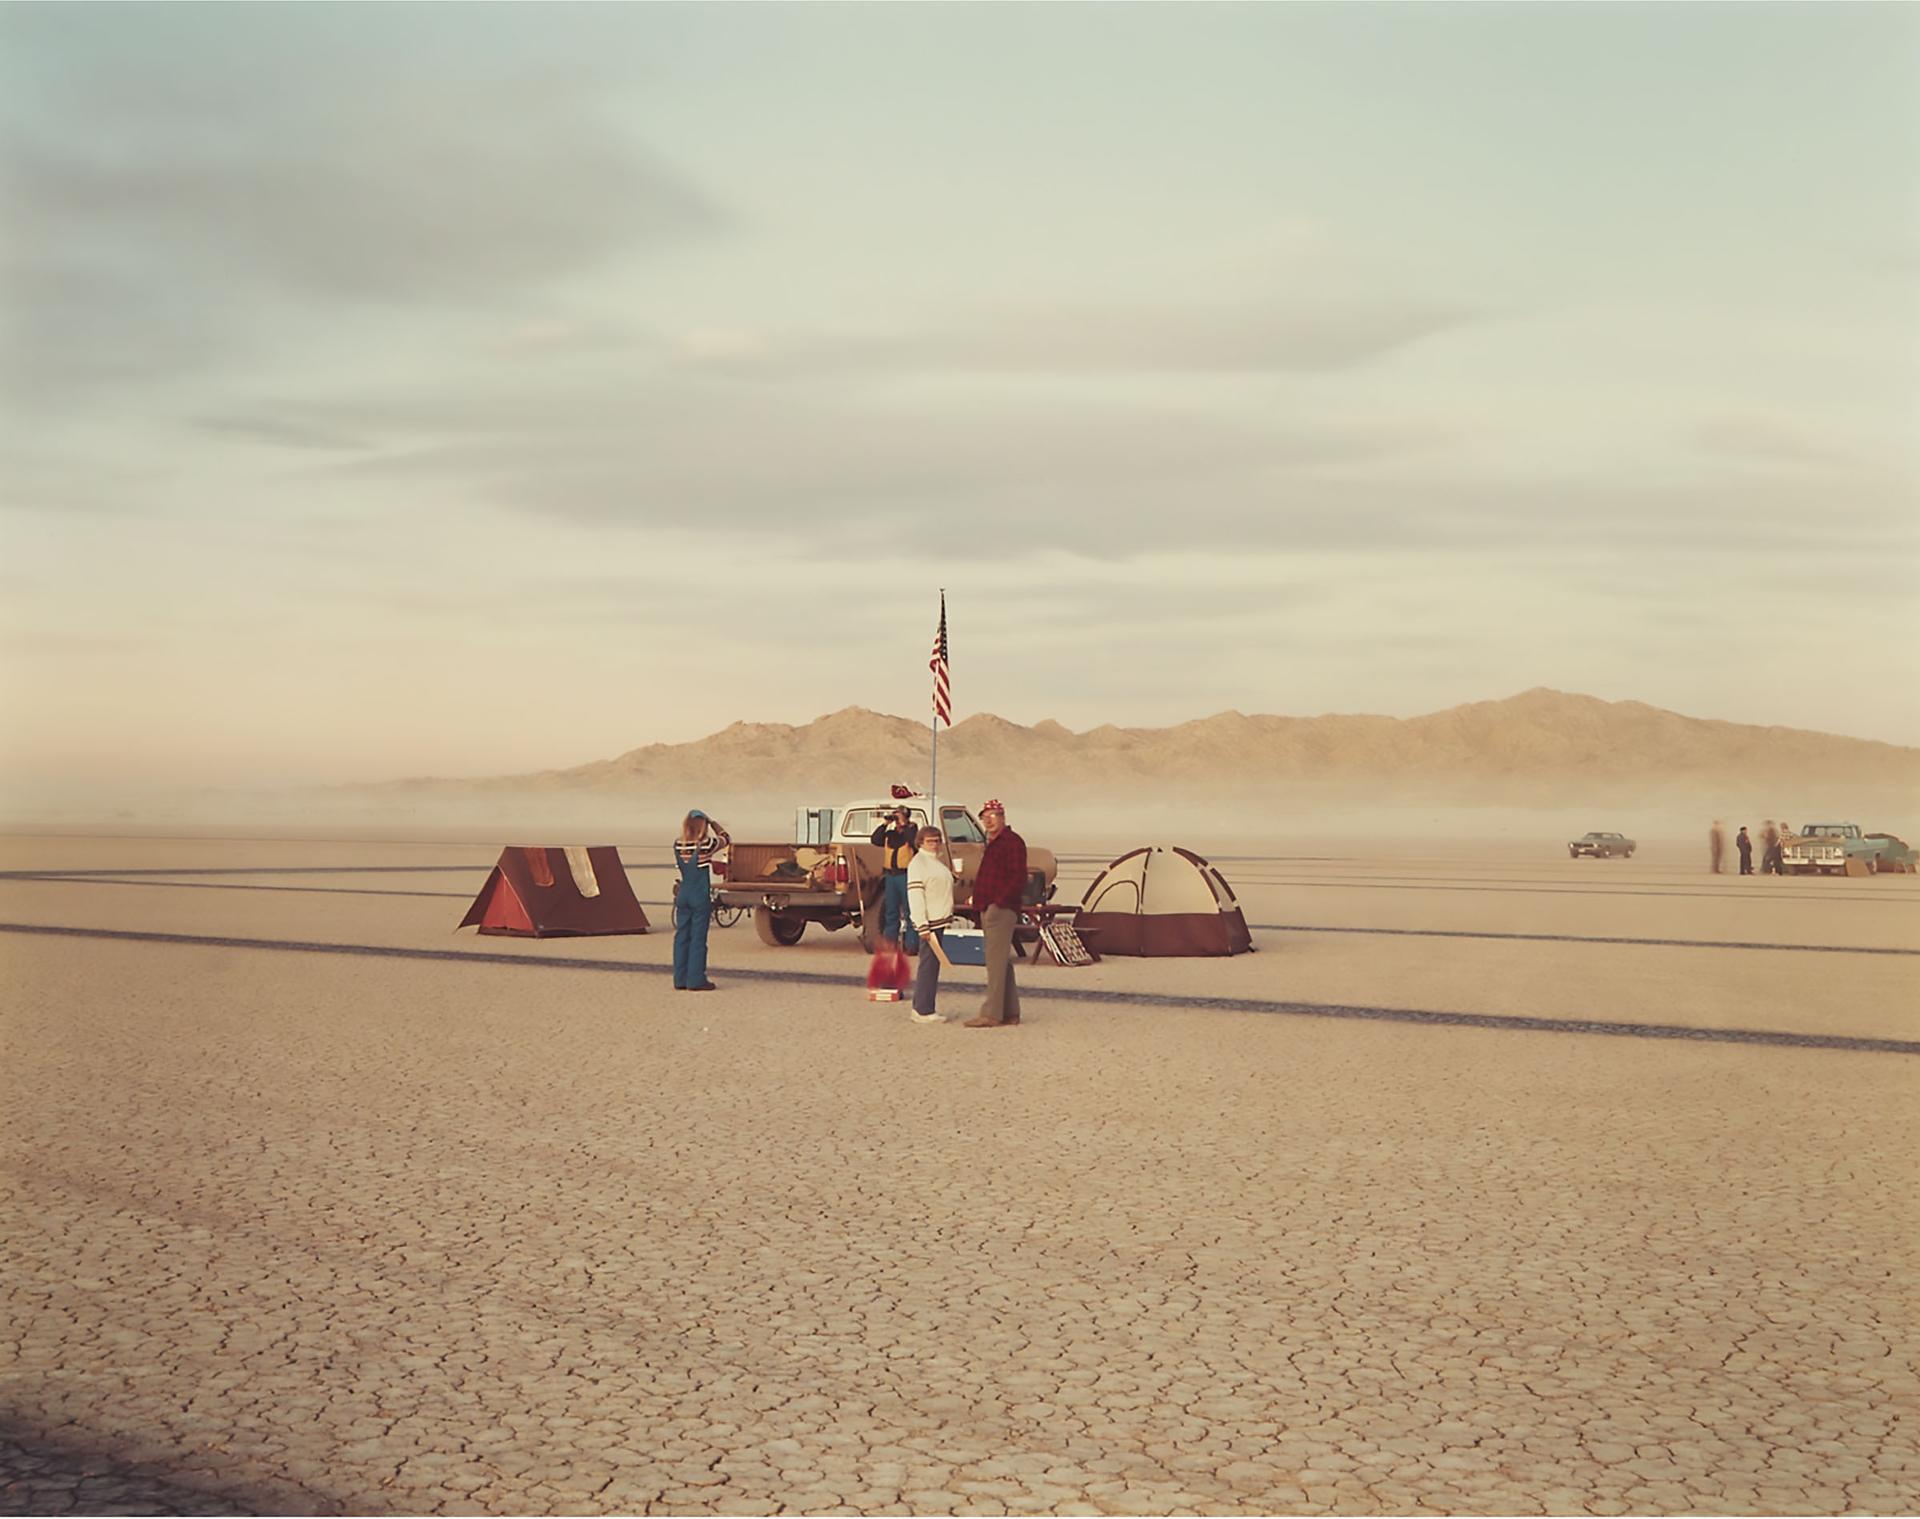 Richard Misrach (1949) - Waiting, Edward’s Air Force Base (From Desert Cantos Ii), 1983. Printed In 1986